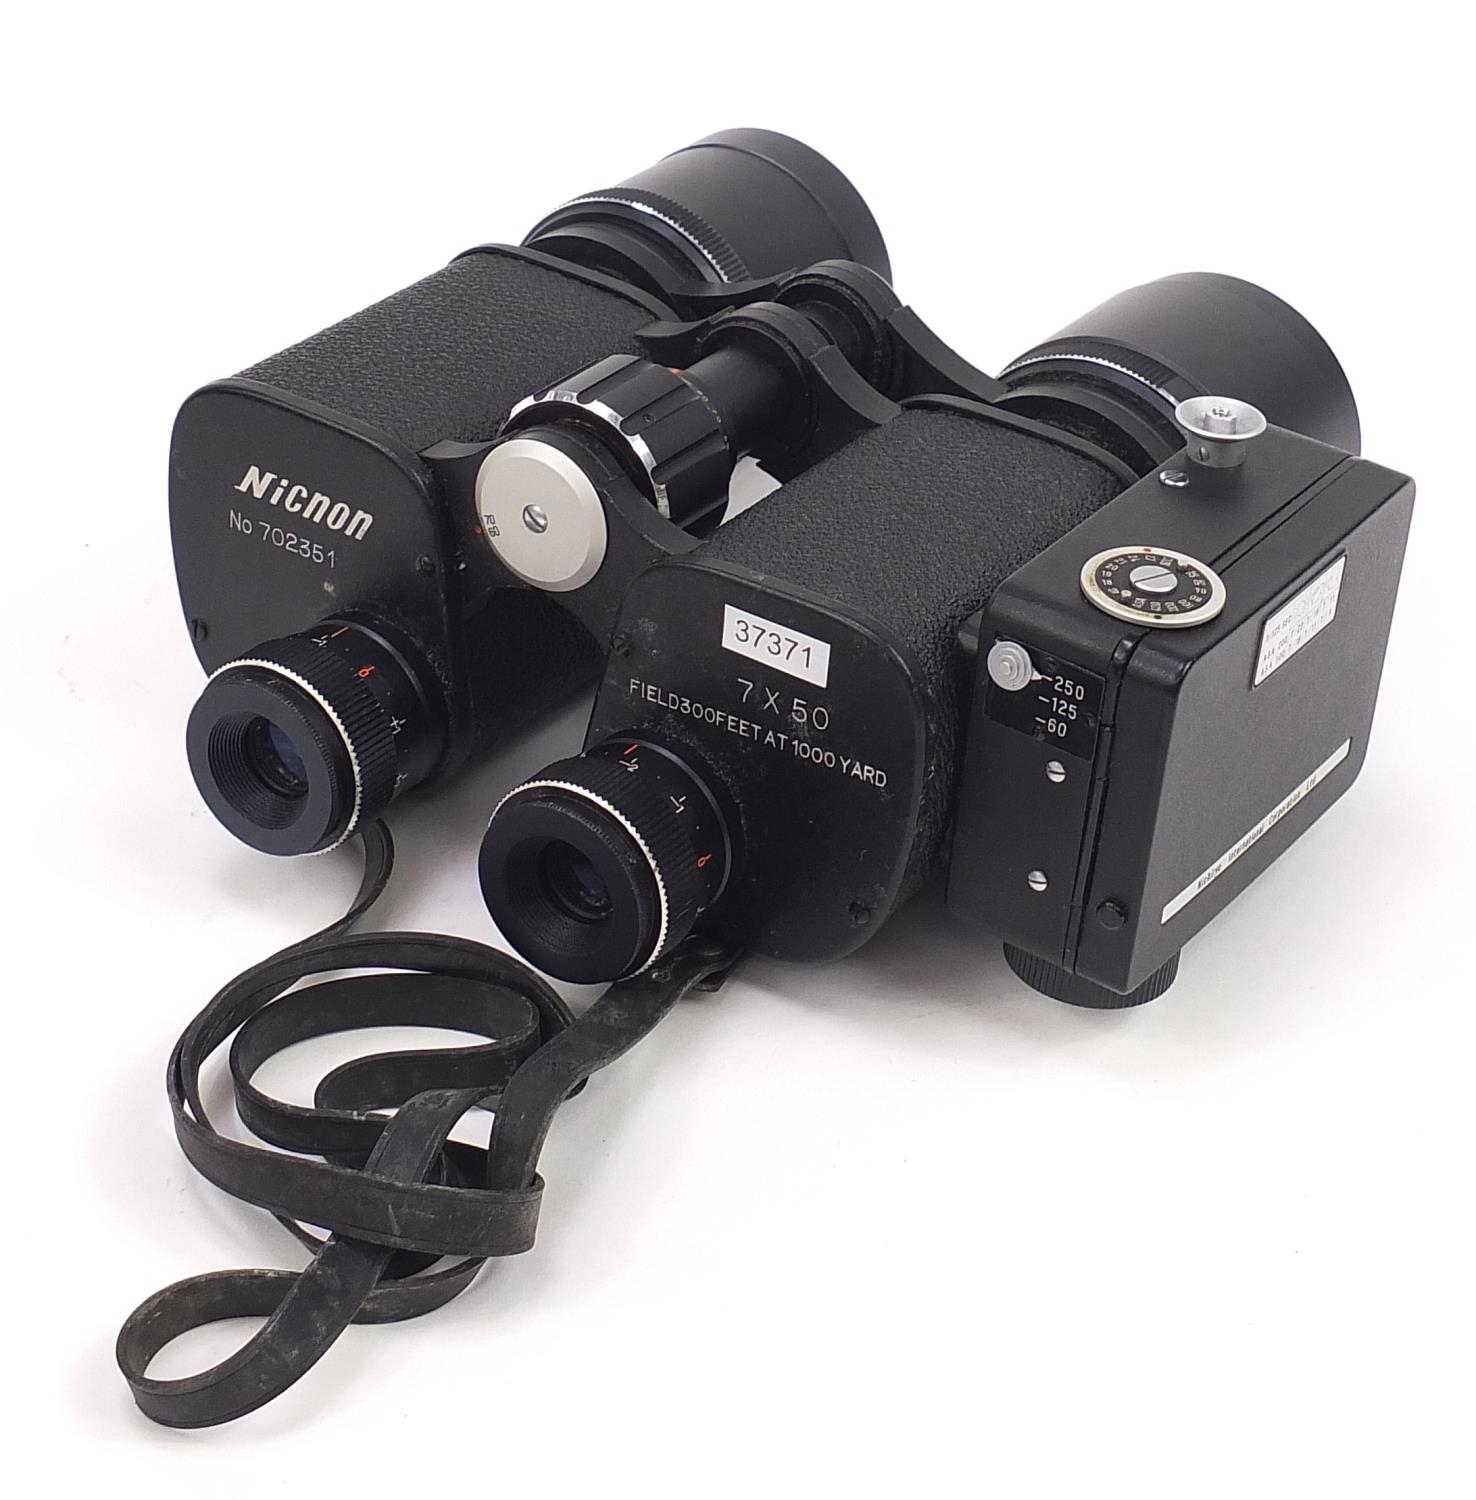 Nicnon TF7X50 combination binoculars and camera with protective case - Image 4 of 4